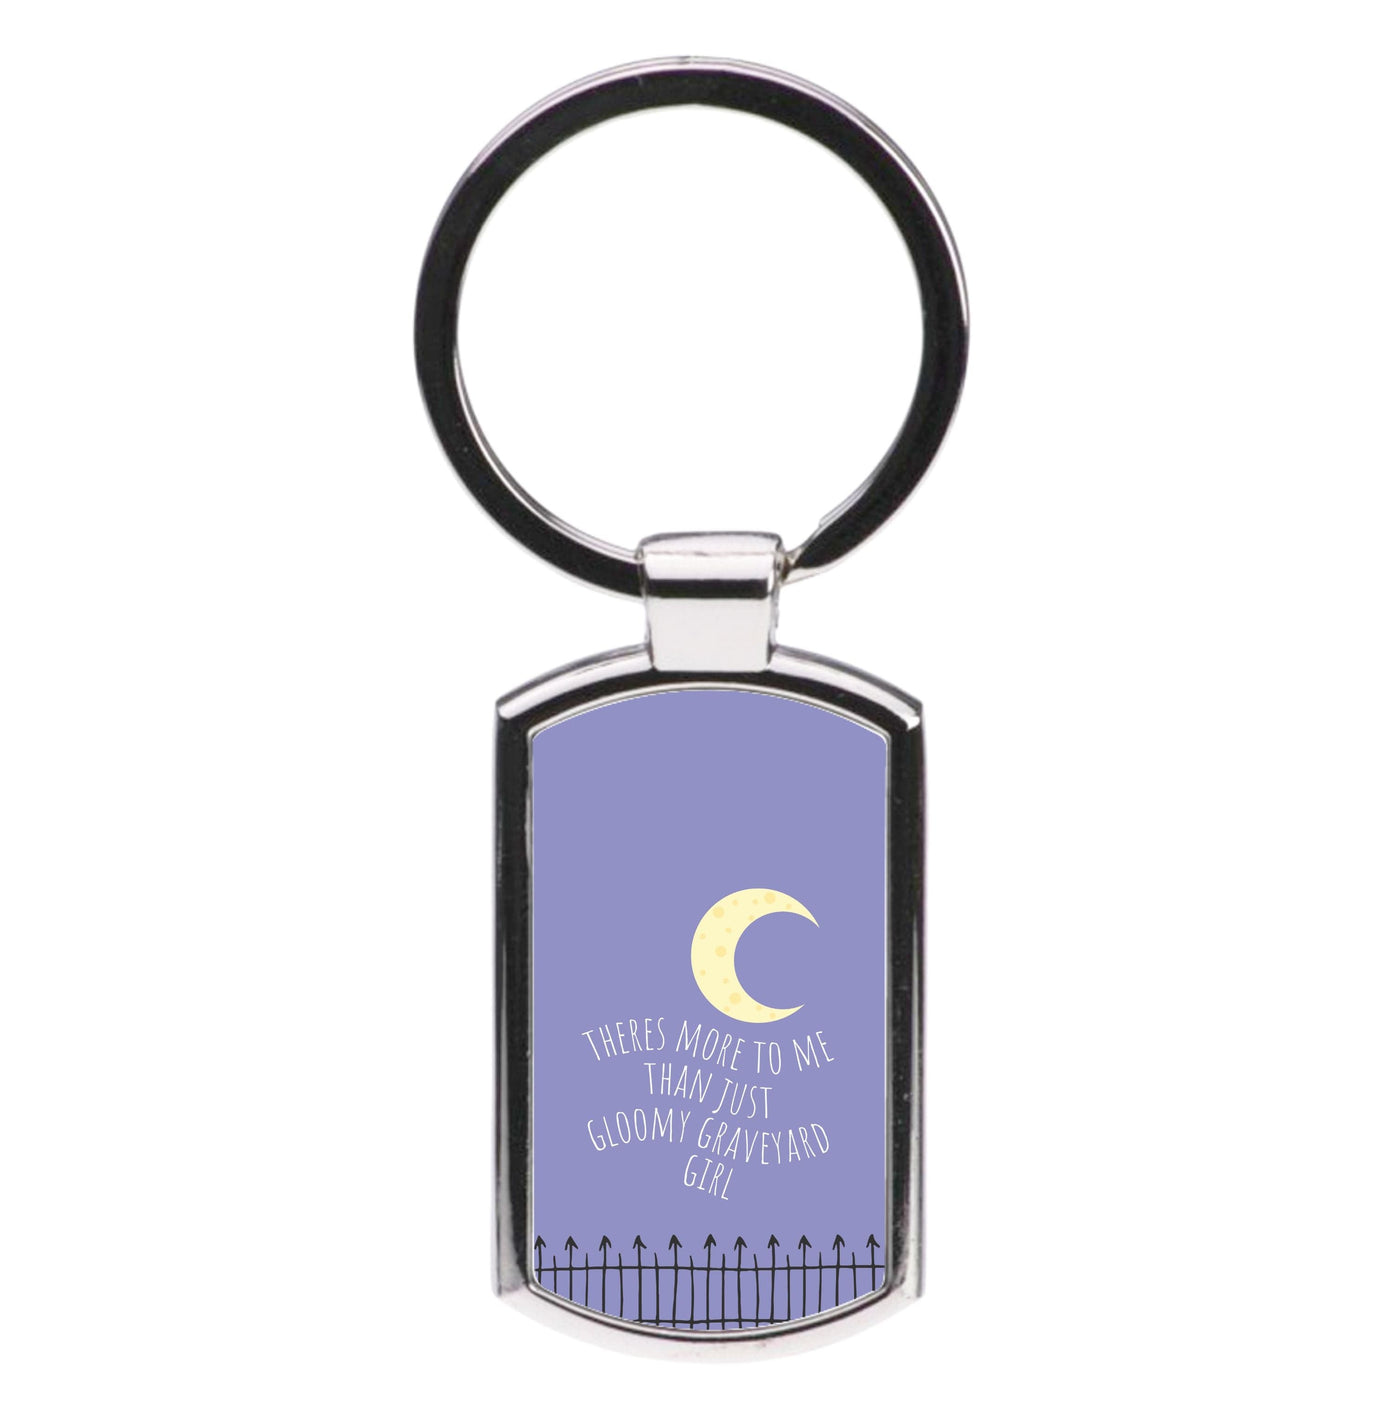 Theres More To Me - TV Quotes Luxury Keyring